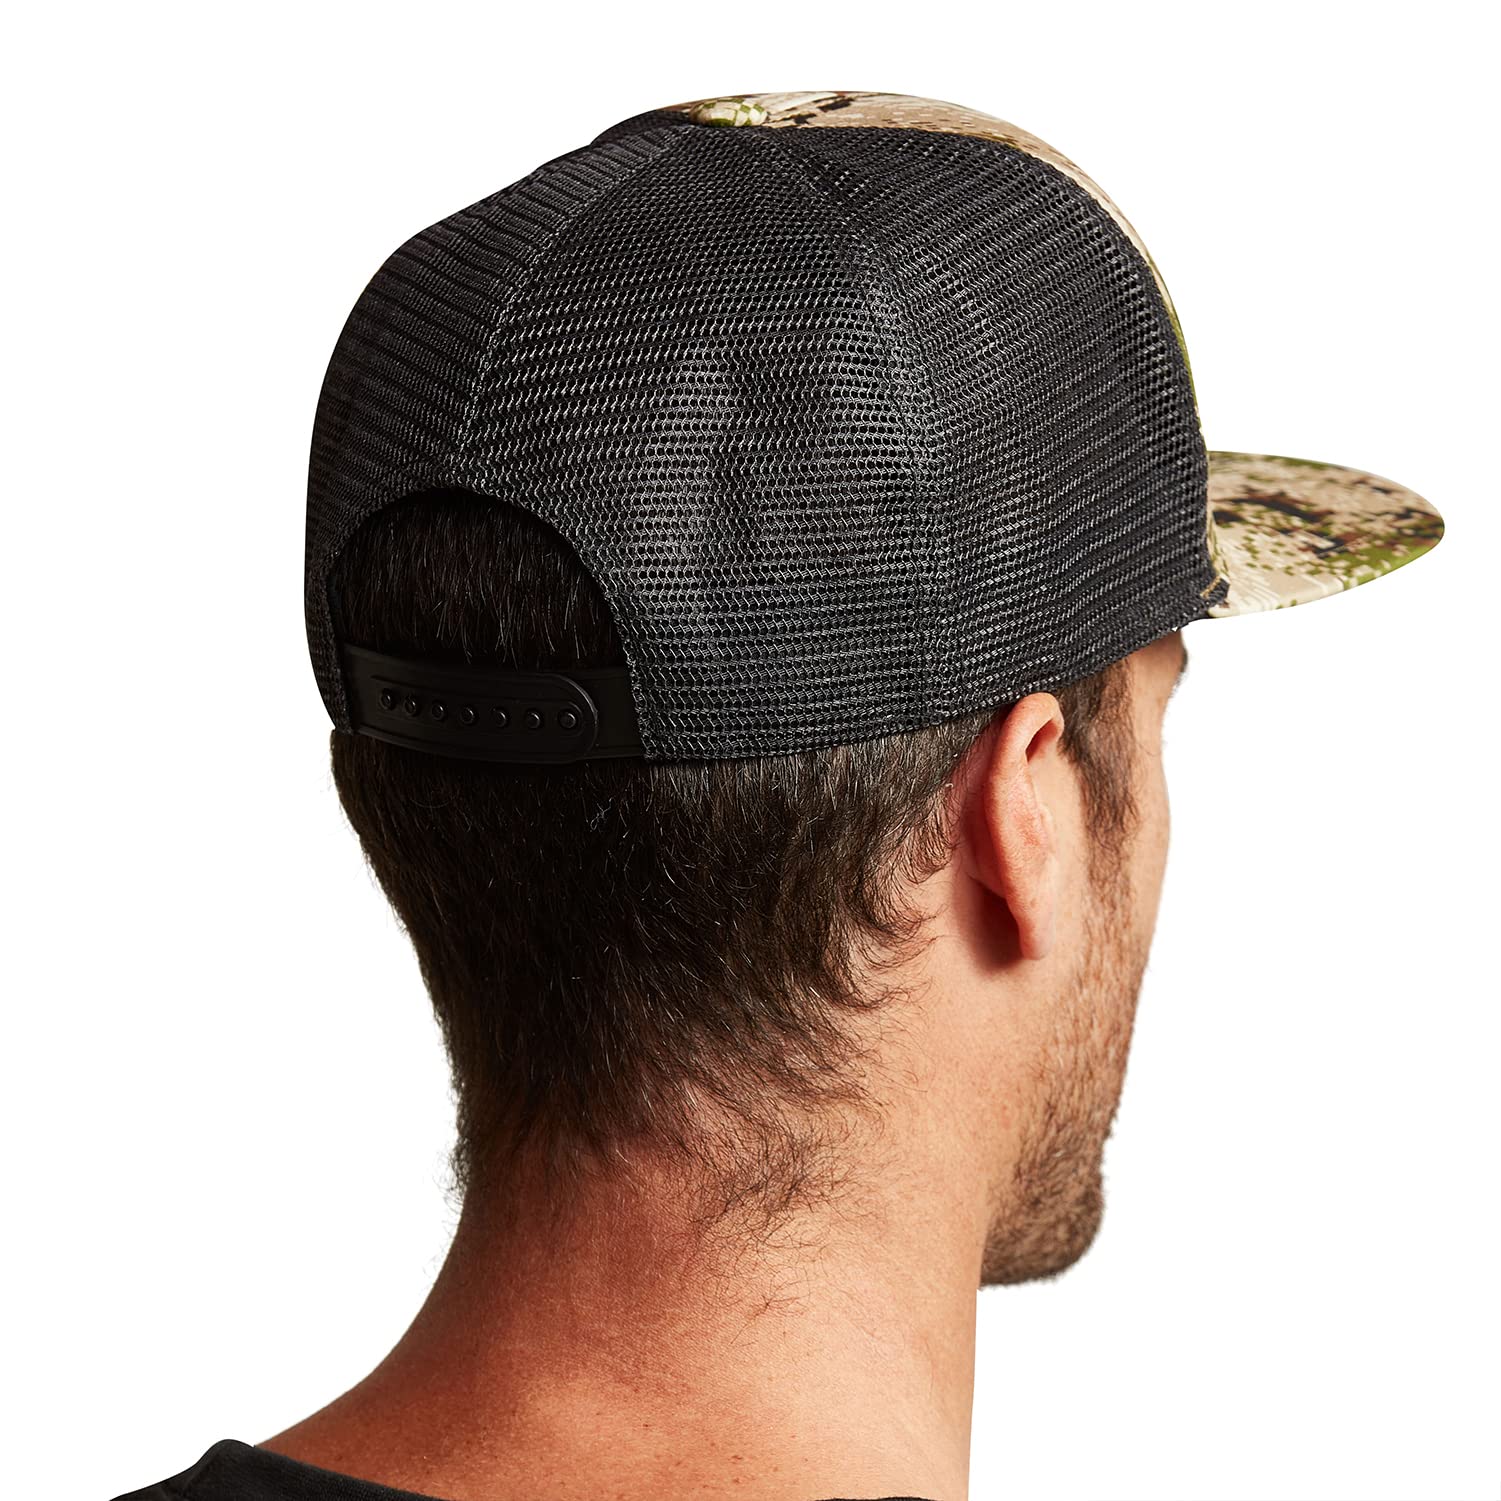 SITKA Gear Men's Trucker Breathable Mesh Hunting Cap-One Size Fits All